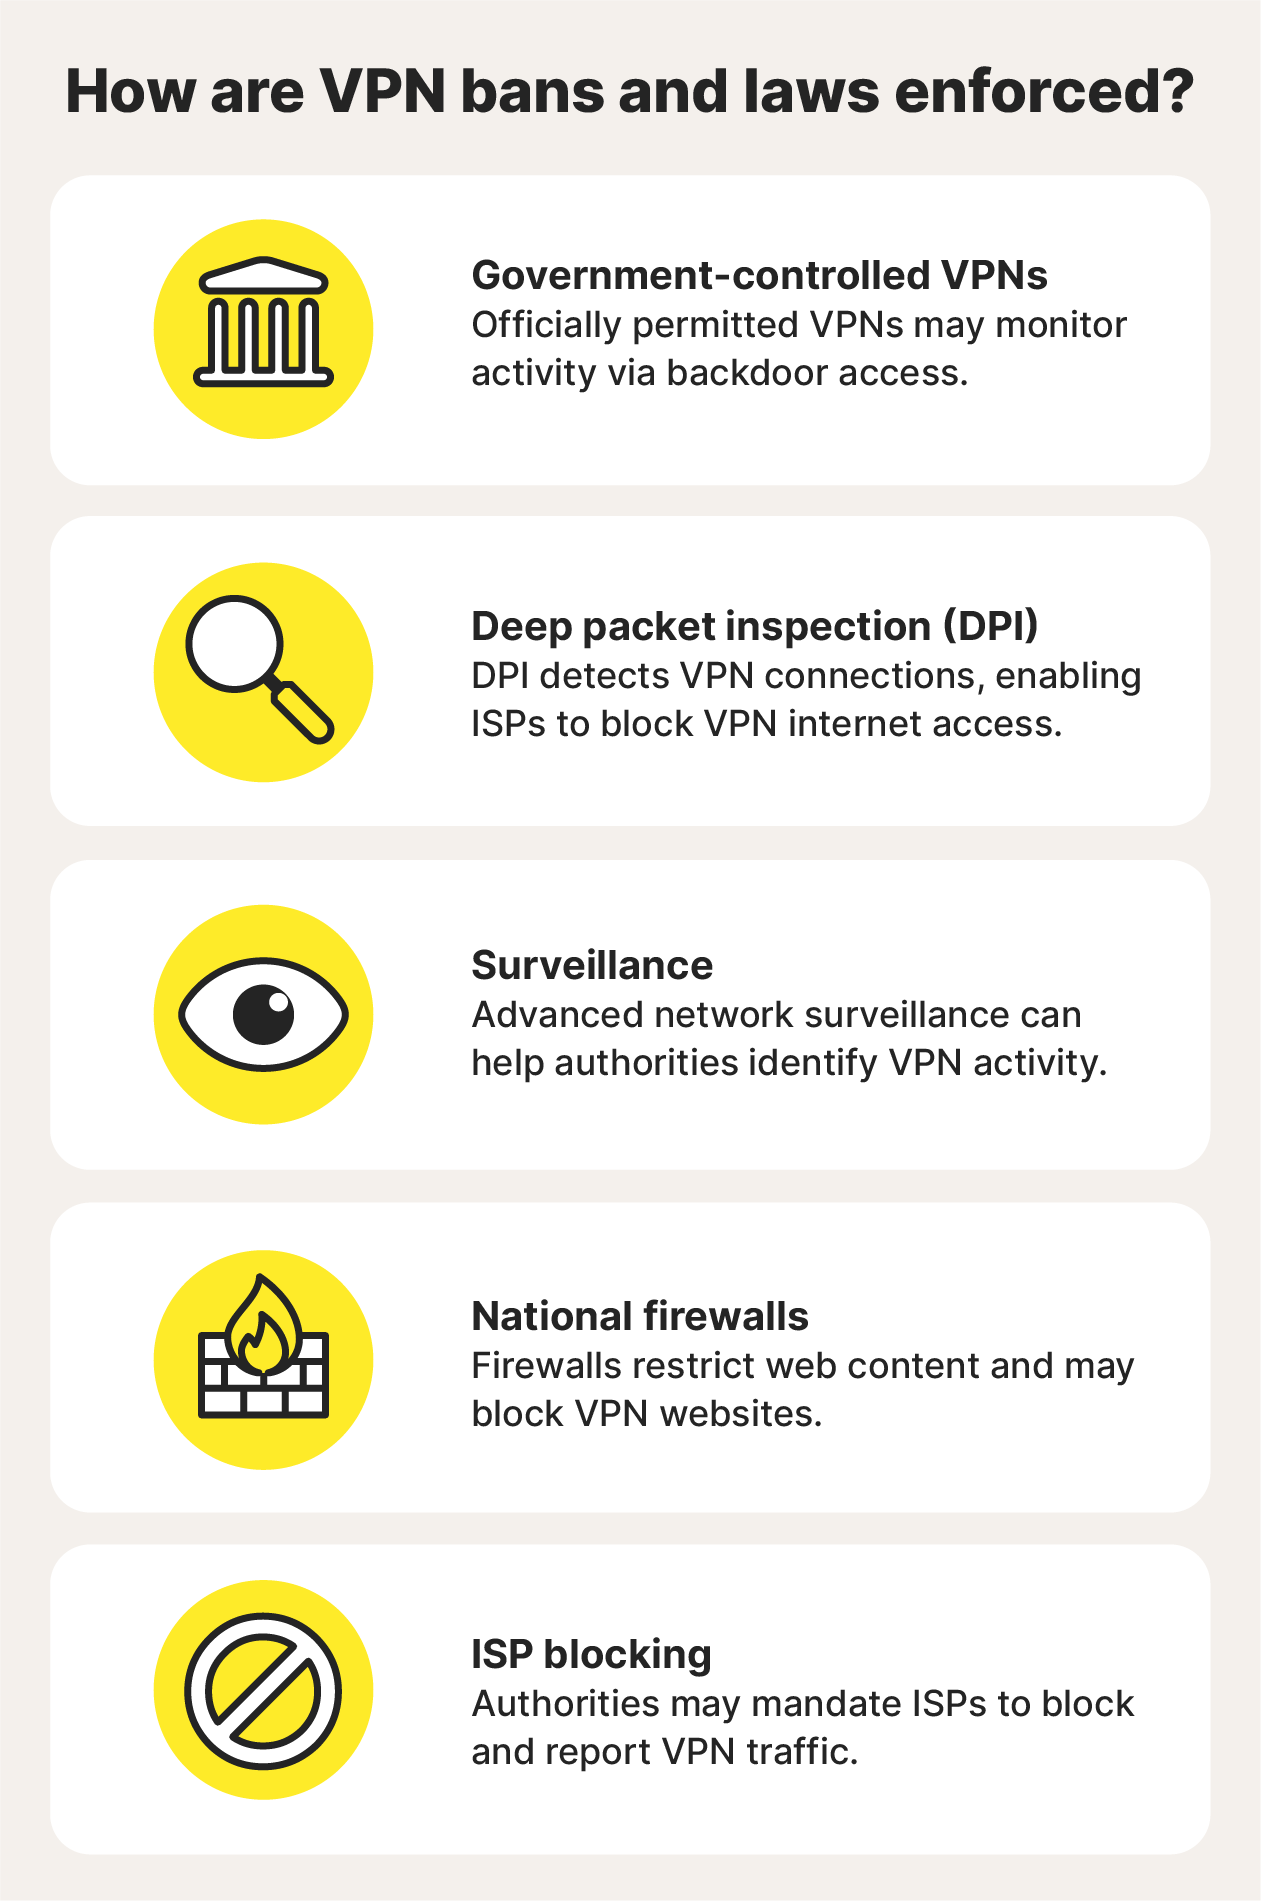 An infographic showing how VPN bans and laws are enforced.